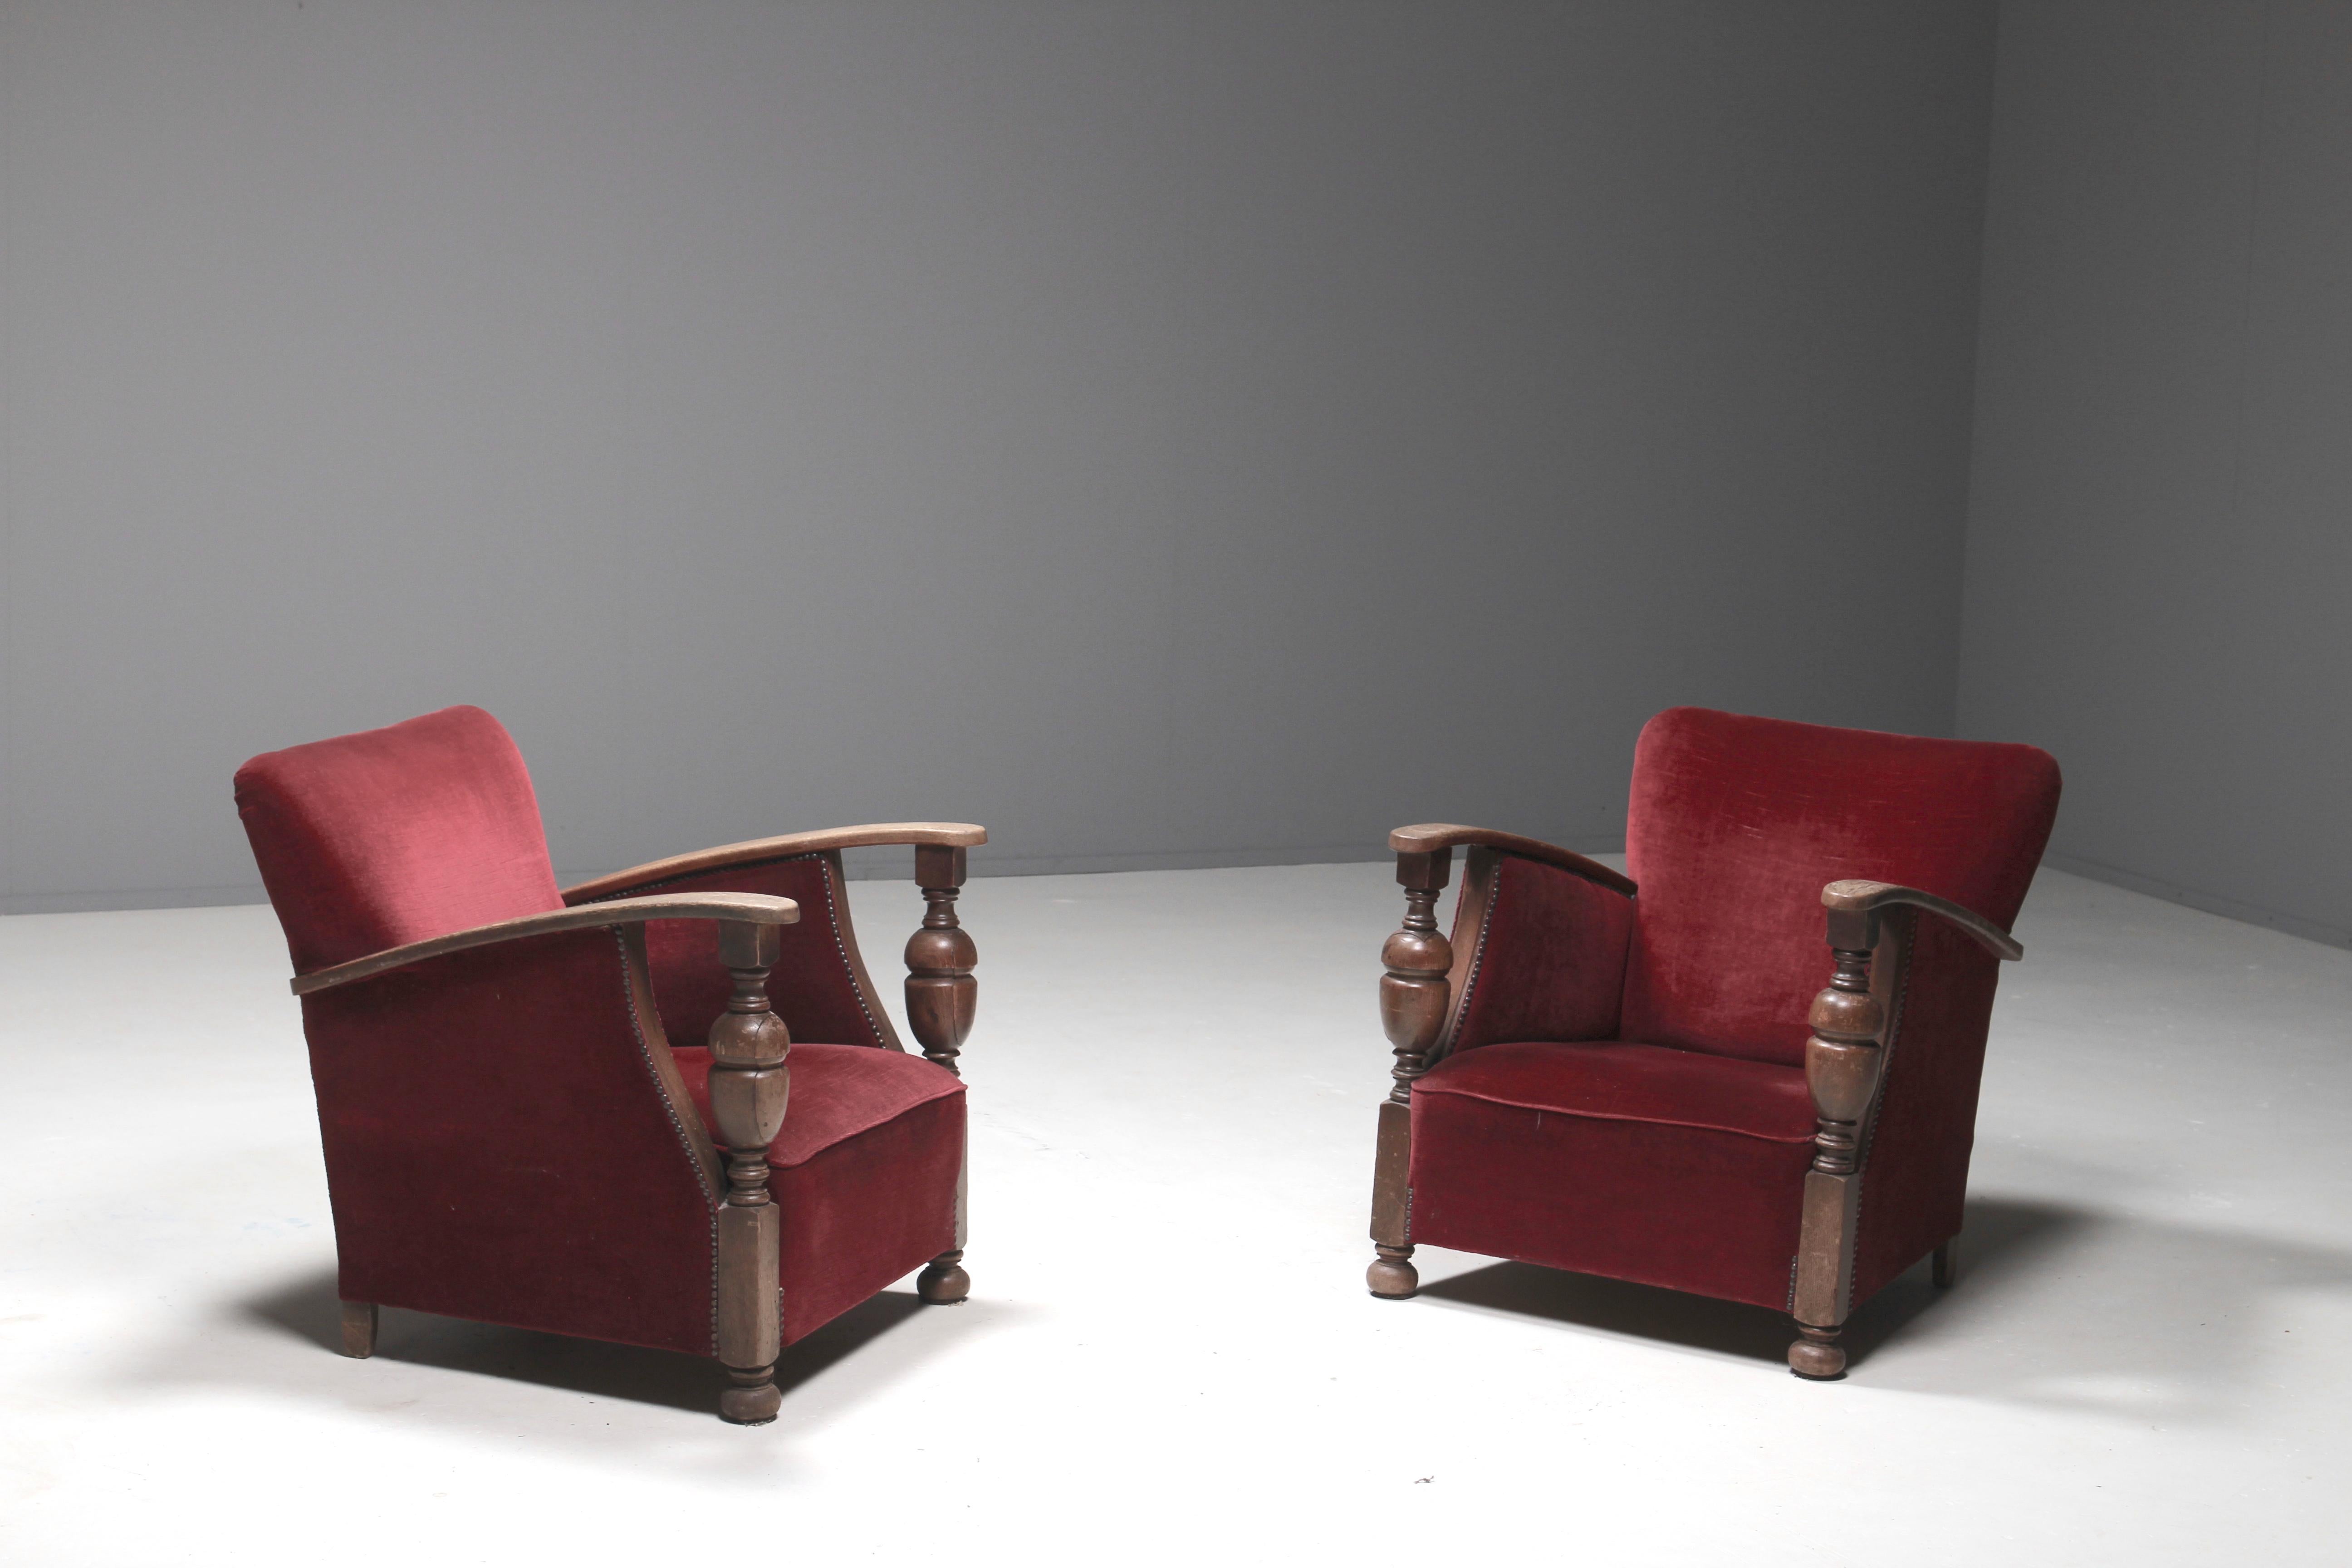 Dutch Art Deco Armchairs in Oak and Red Mohair, circa 1930s For Sale 2